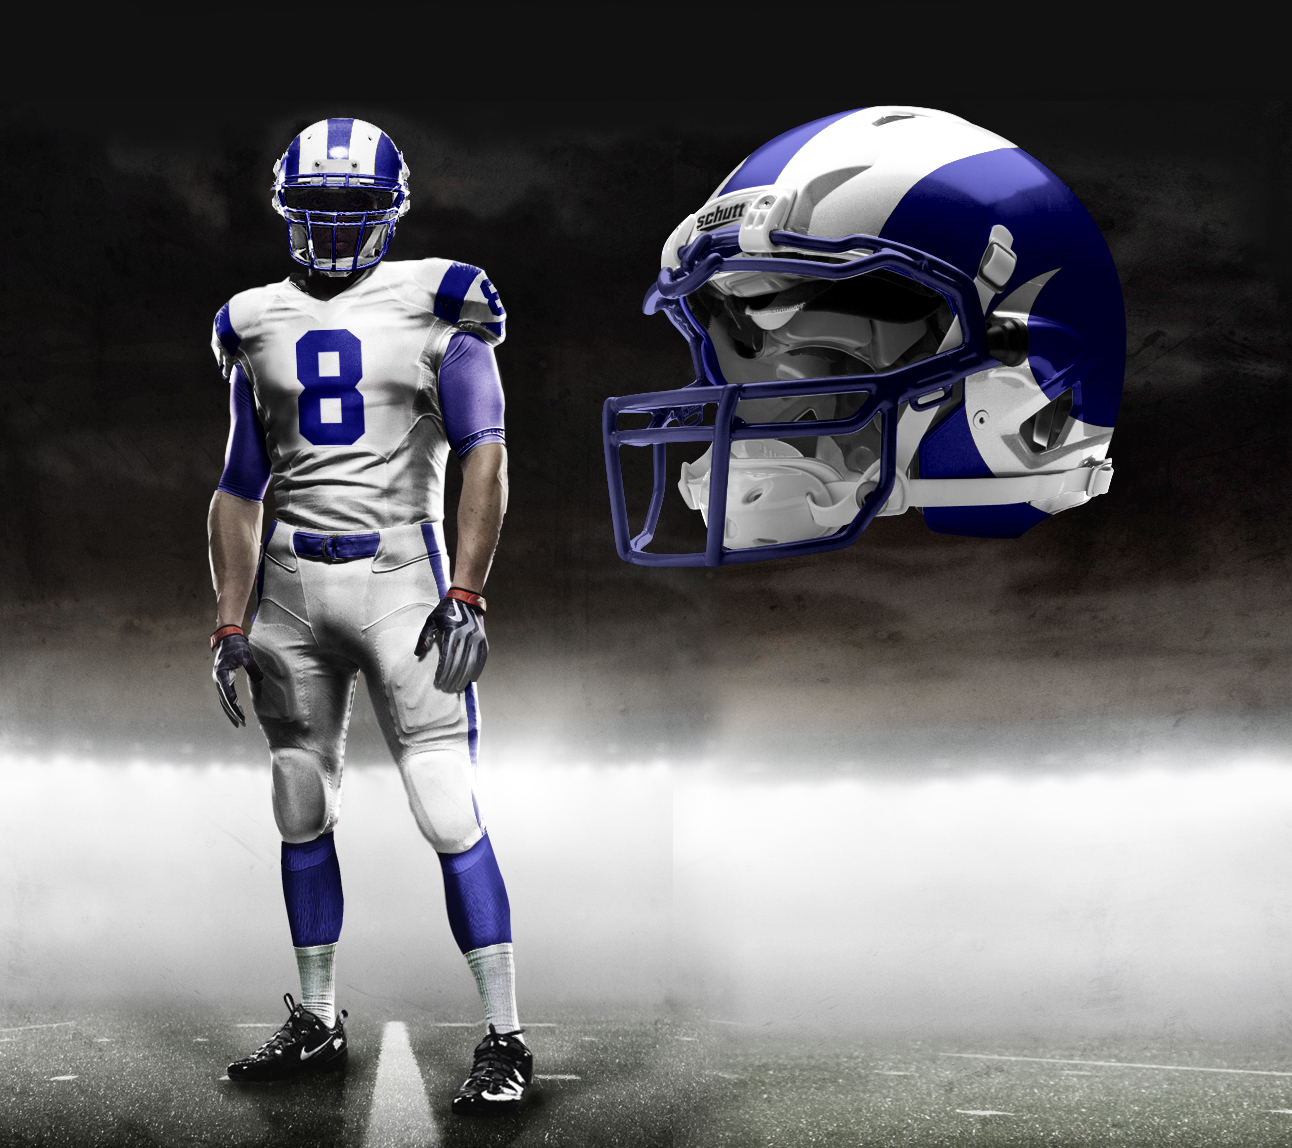 rams throwback jersey blue and white